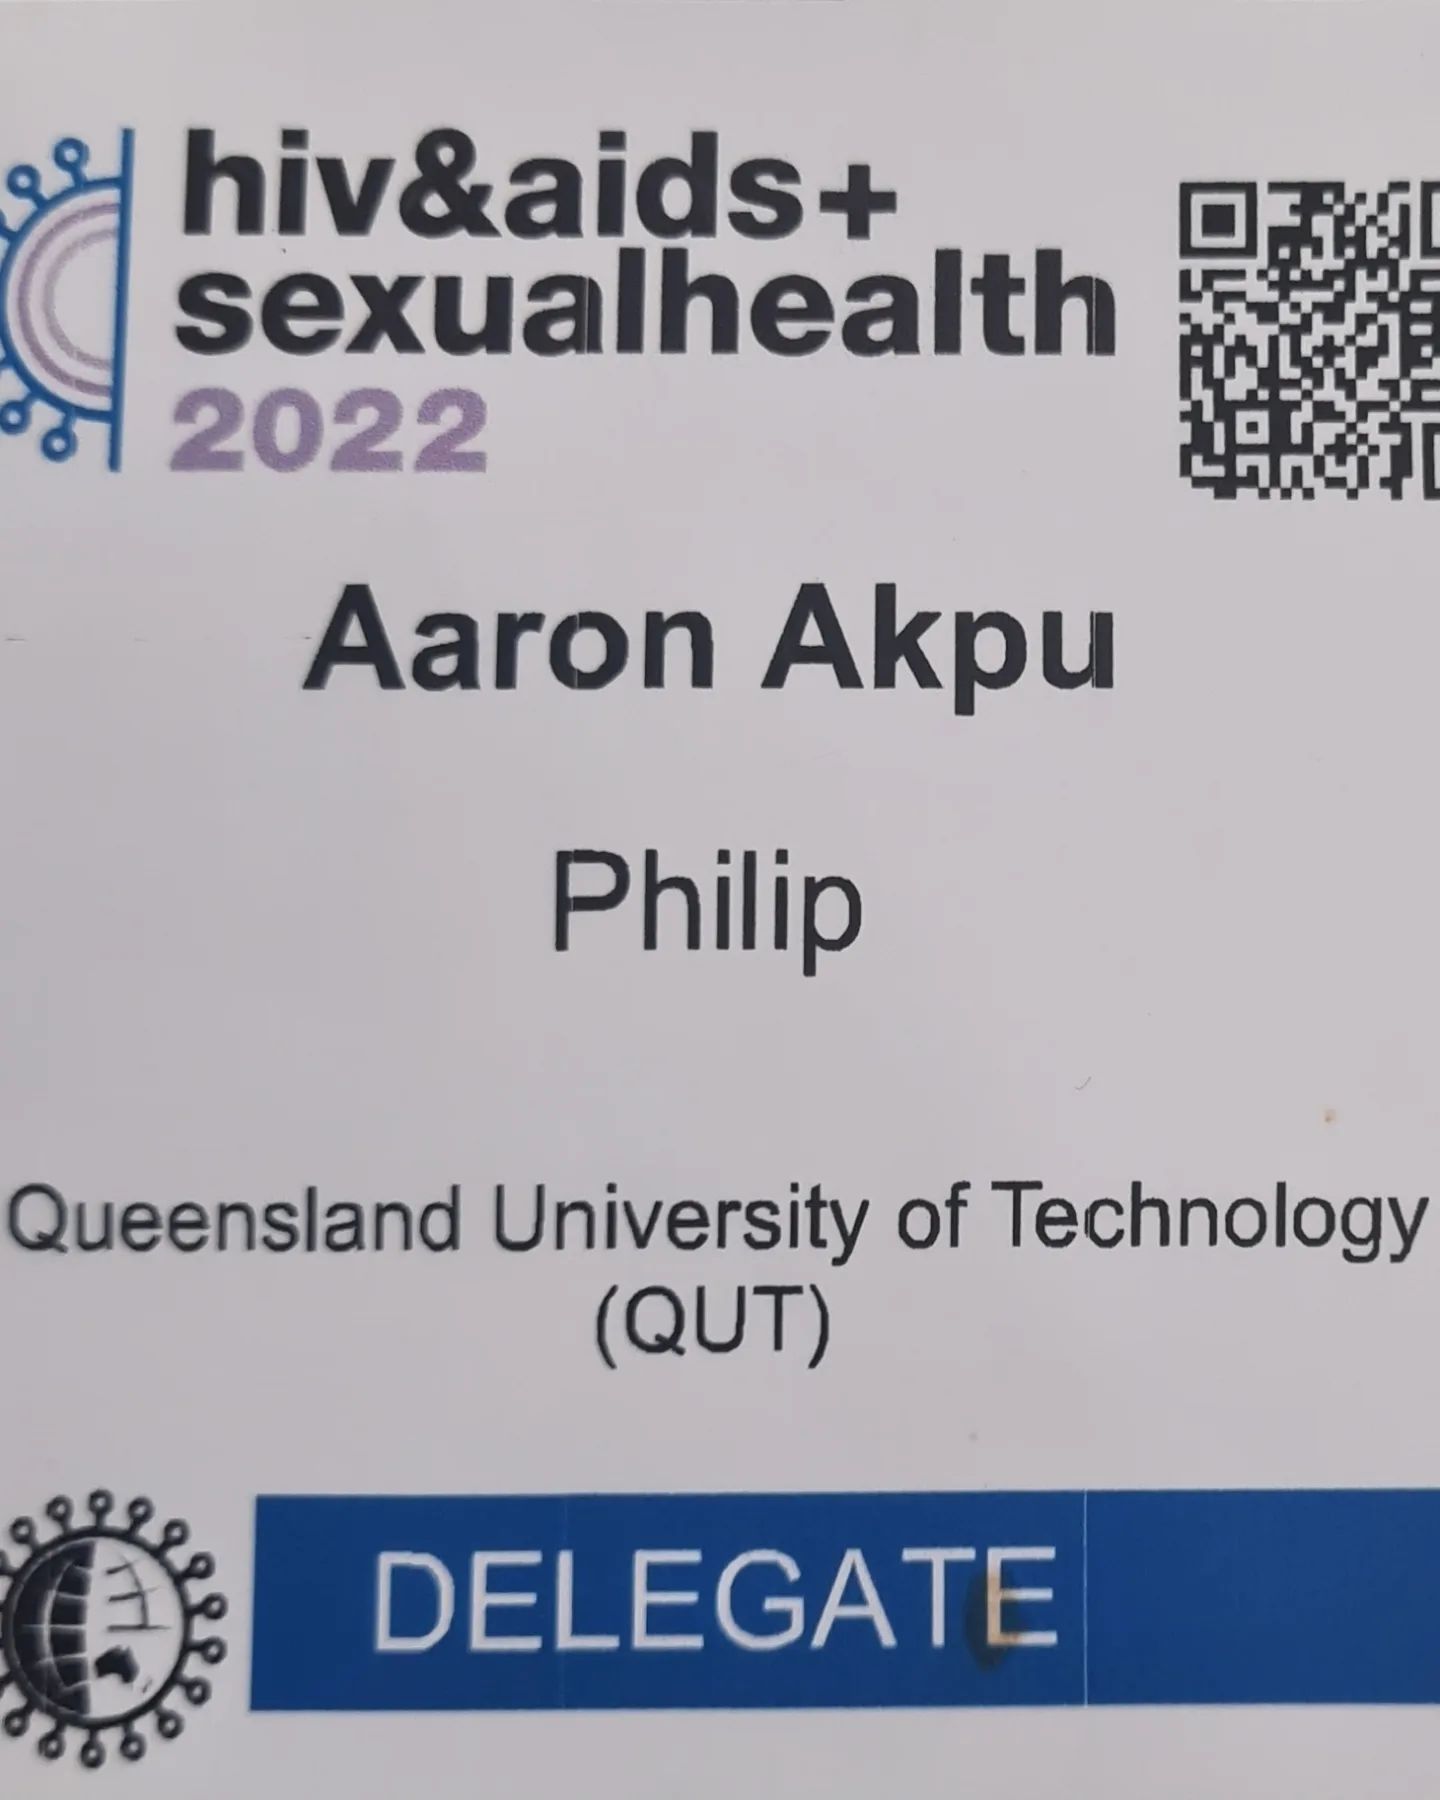 Featured image for “JOINT AUSTRALASIAN HIV&AIDS + SEXUAL HEALTH CONFERENCES 2022”